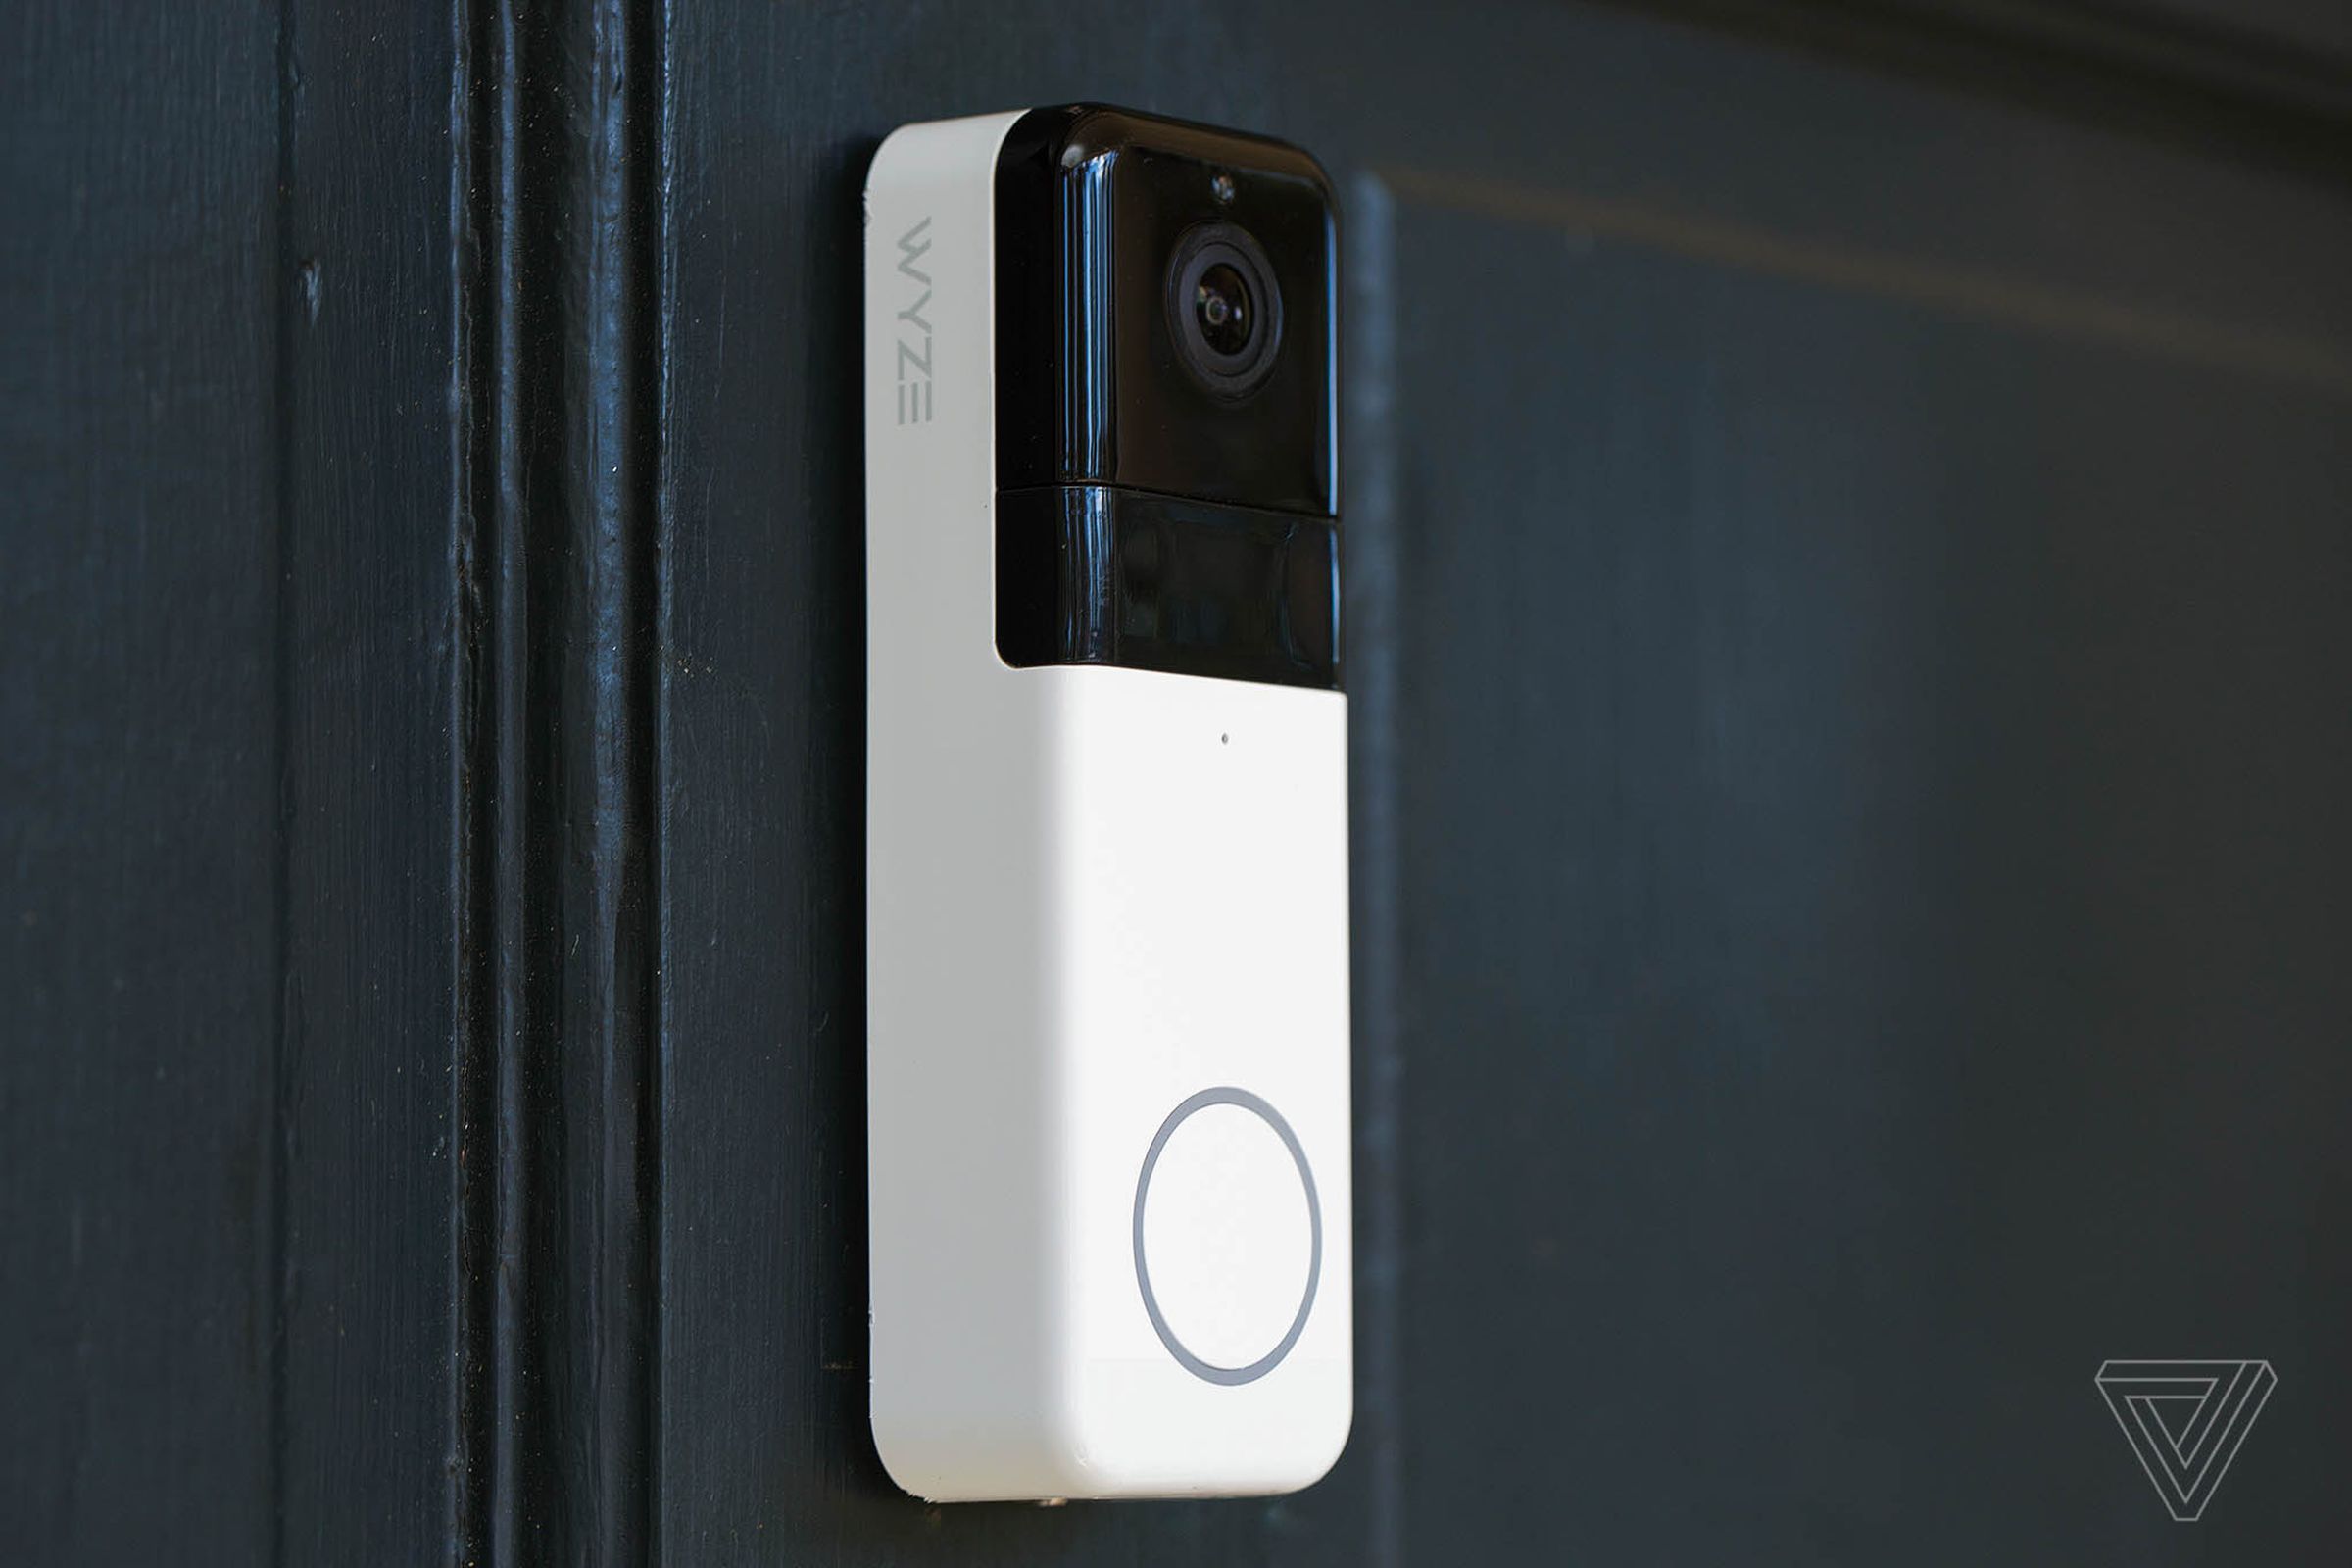 The Wyze Pro doorbell is 5.5 inches tall, 1.8 inches wide, and 1.1 inches thick. Blue LEDs light up the button when the camera detects motion.